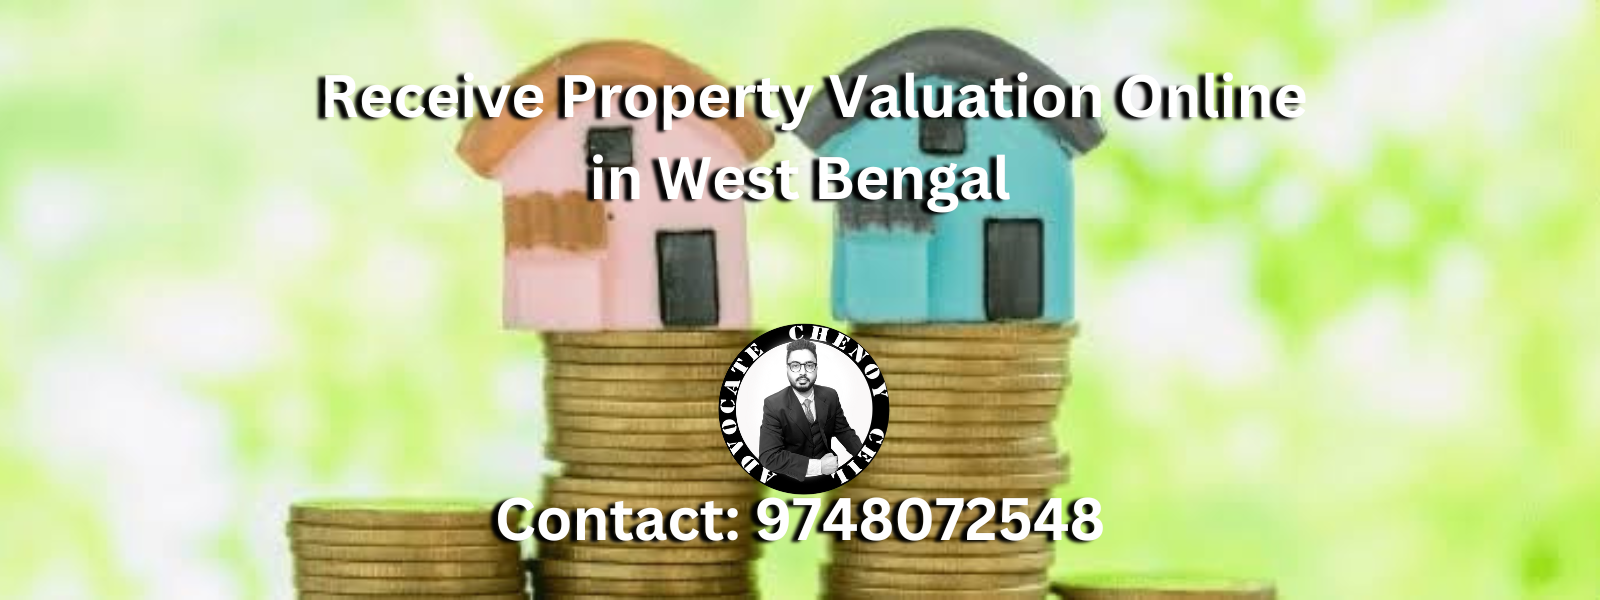 Property Valuation Online in West Bengal